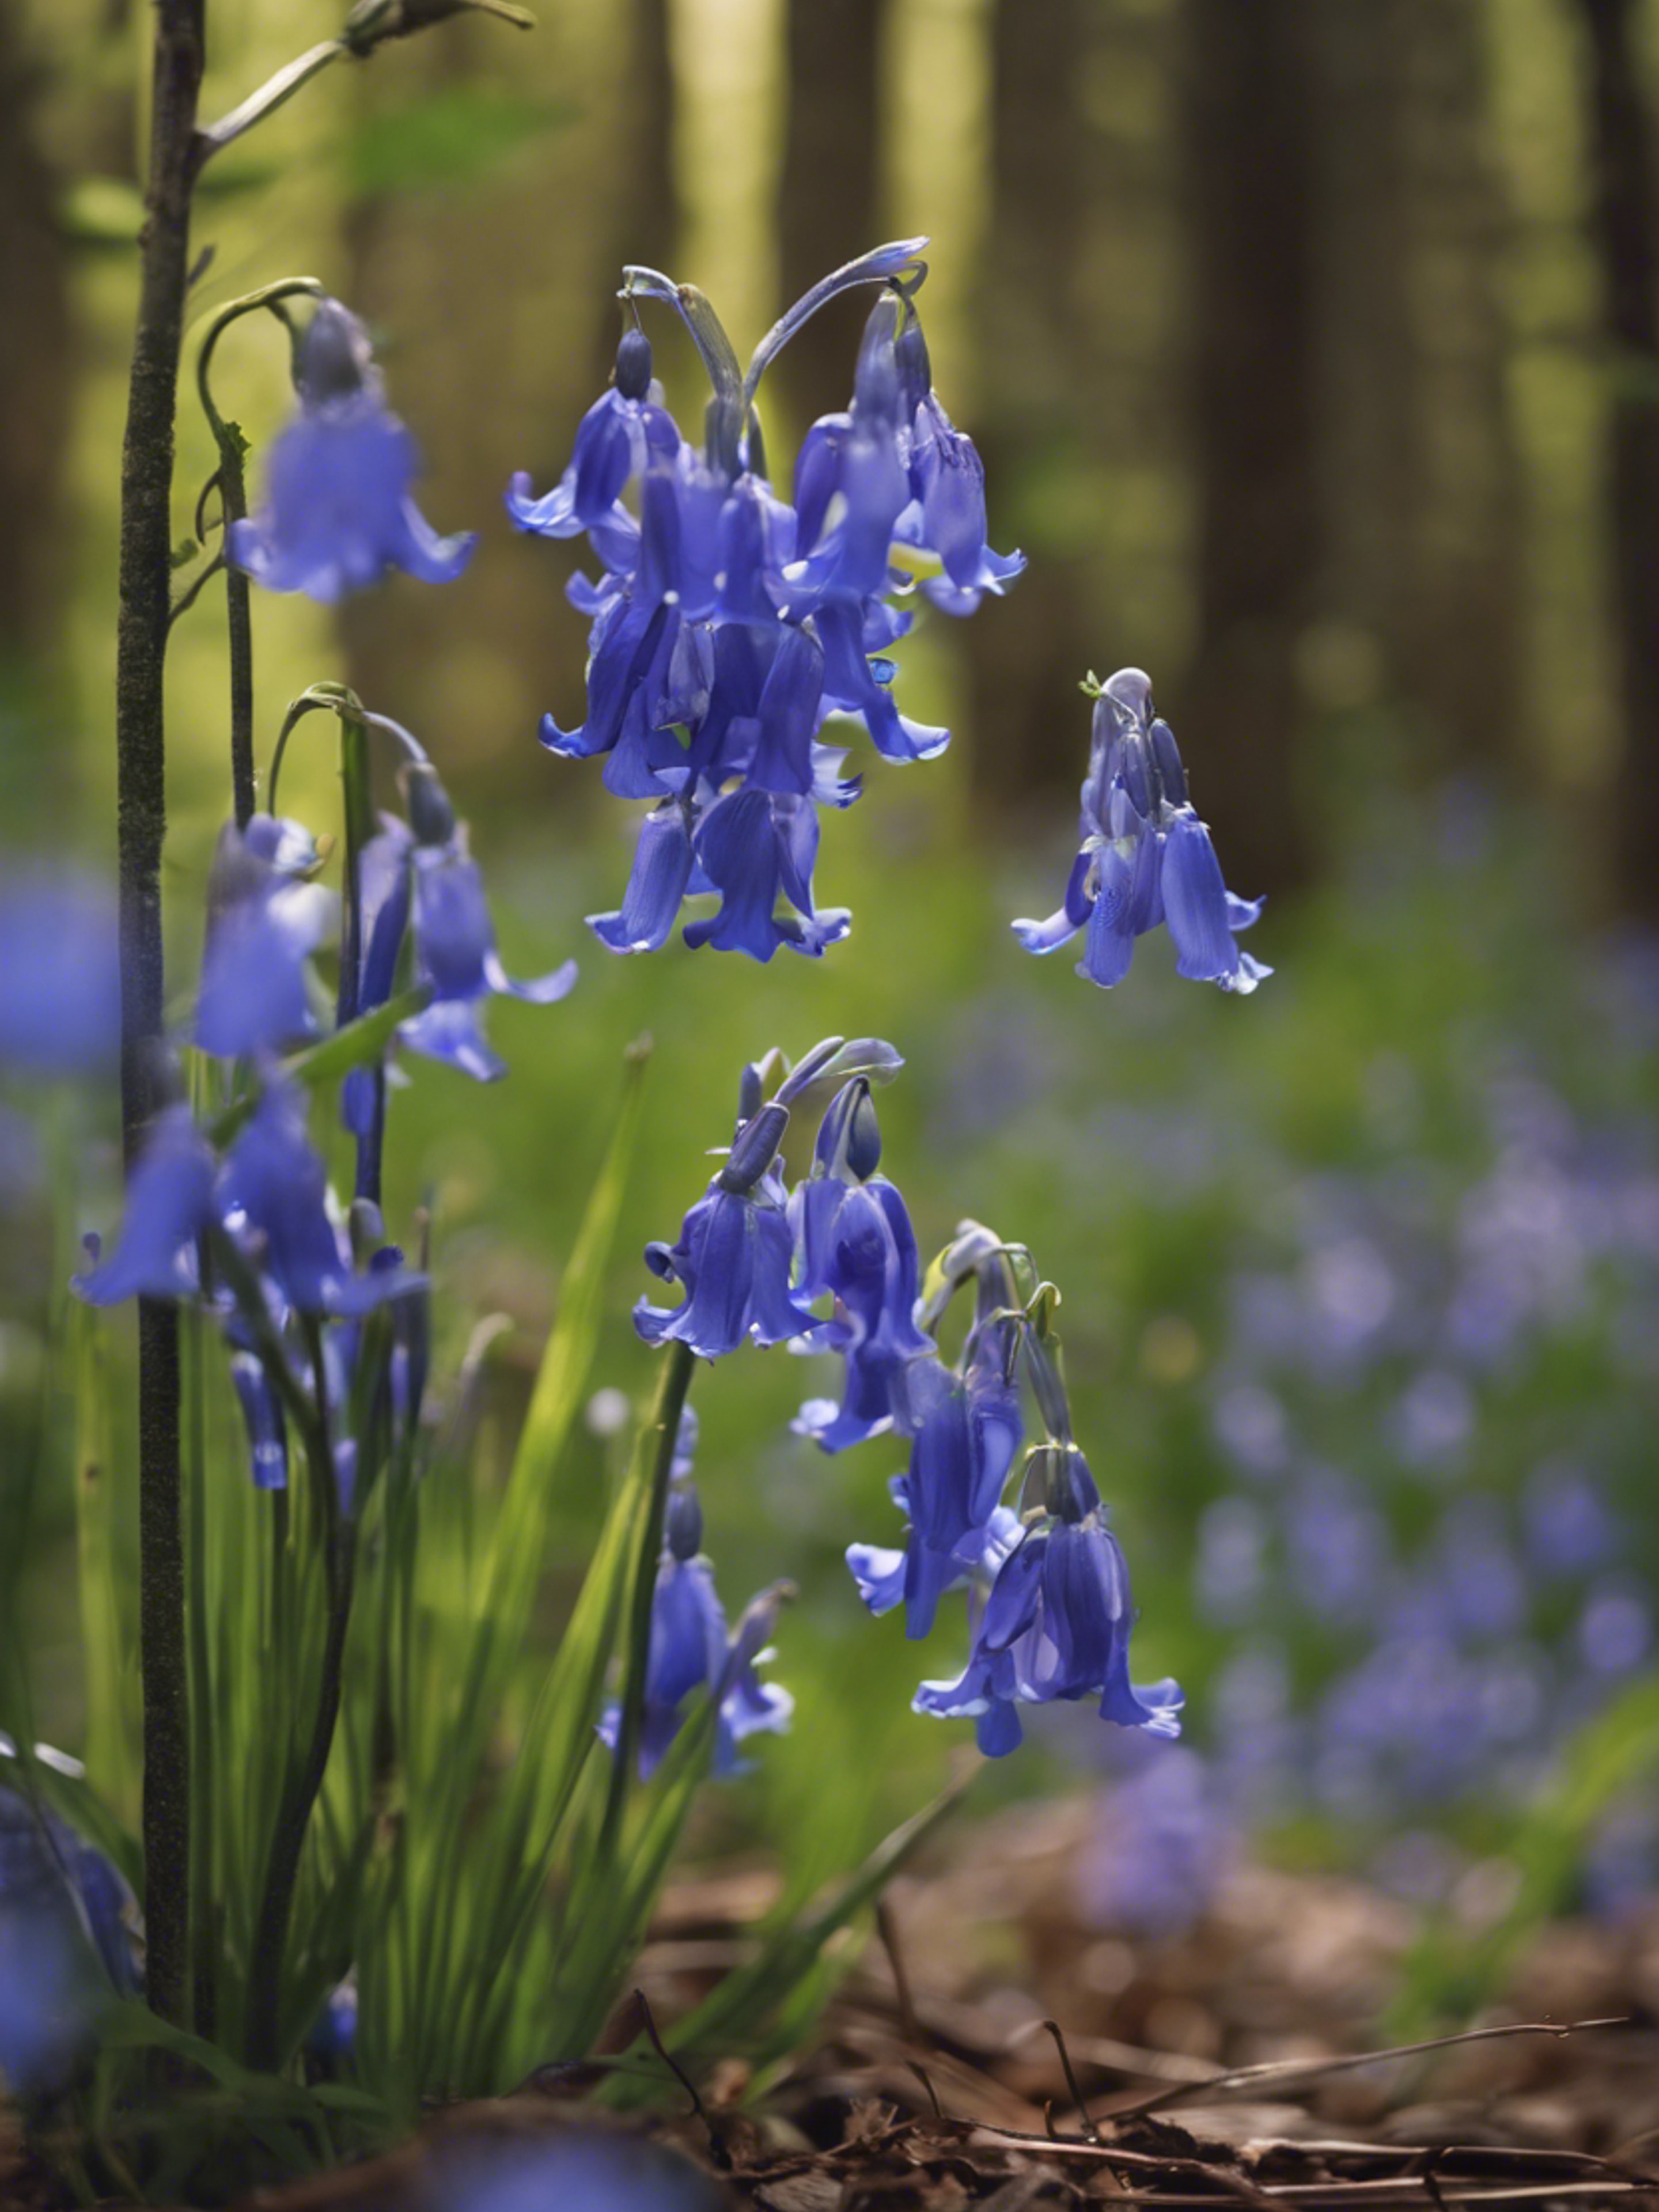 A cluster of bluebells growing in the heart of a dense, untouched forest. duvar kağıdı[e9ac2ad9f62f40e2a0af]